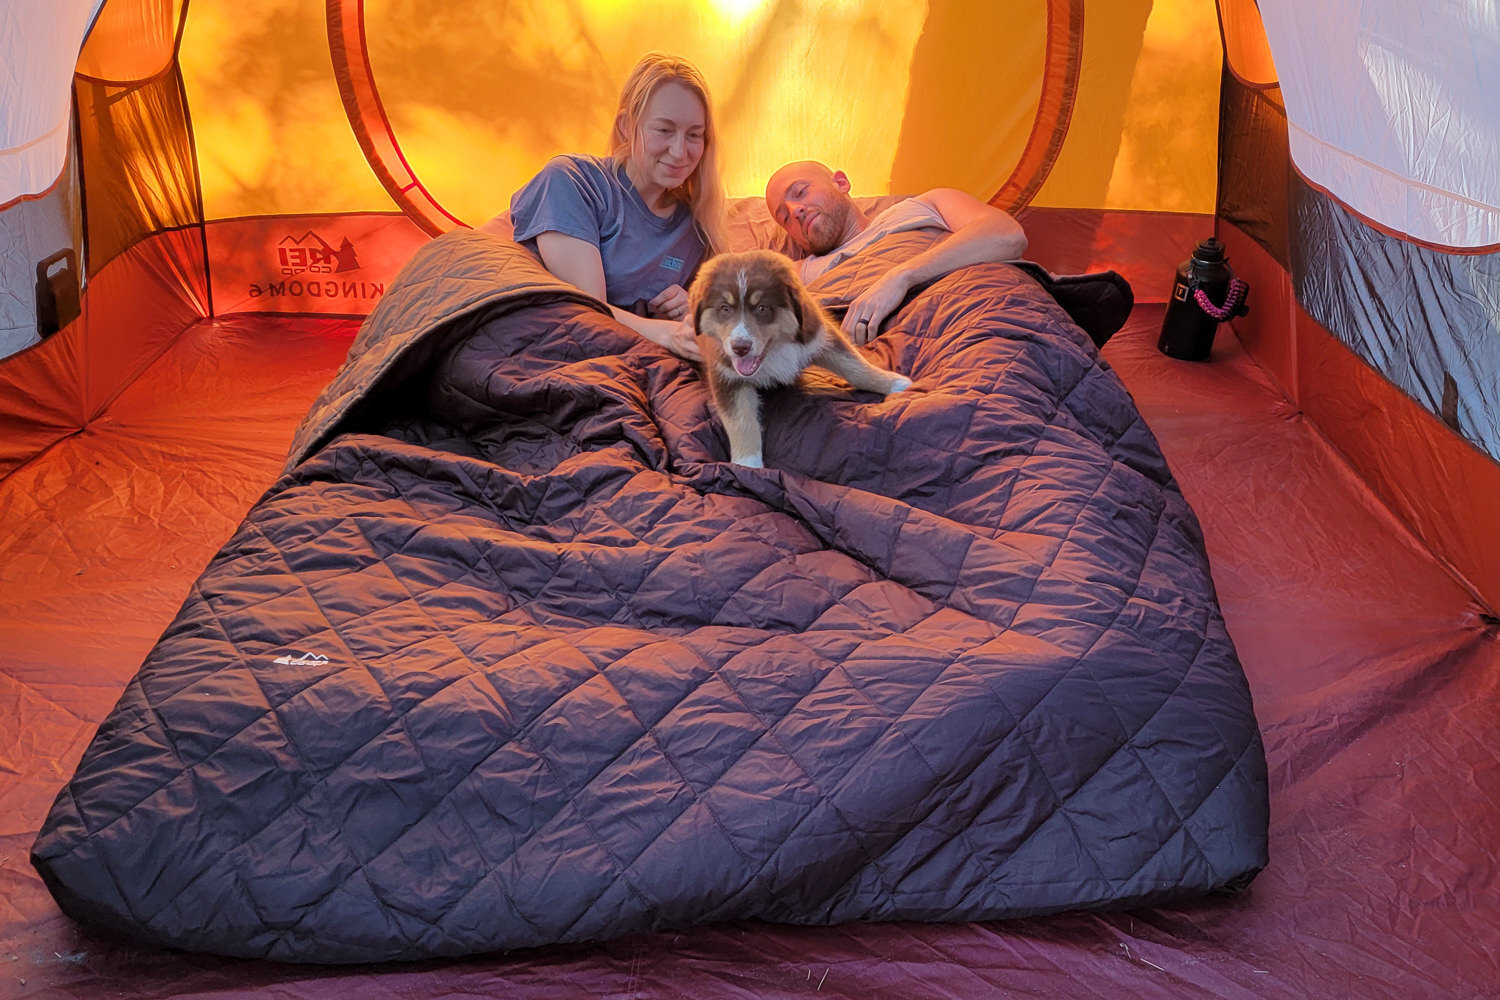 The REI Co-op Kingdom Sleep System 40 includes a queen-size inflatable air mattress, a fitted sheet set, & a thin quilted blanket to make a complete camping bed.